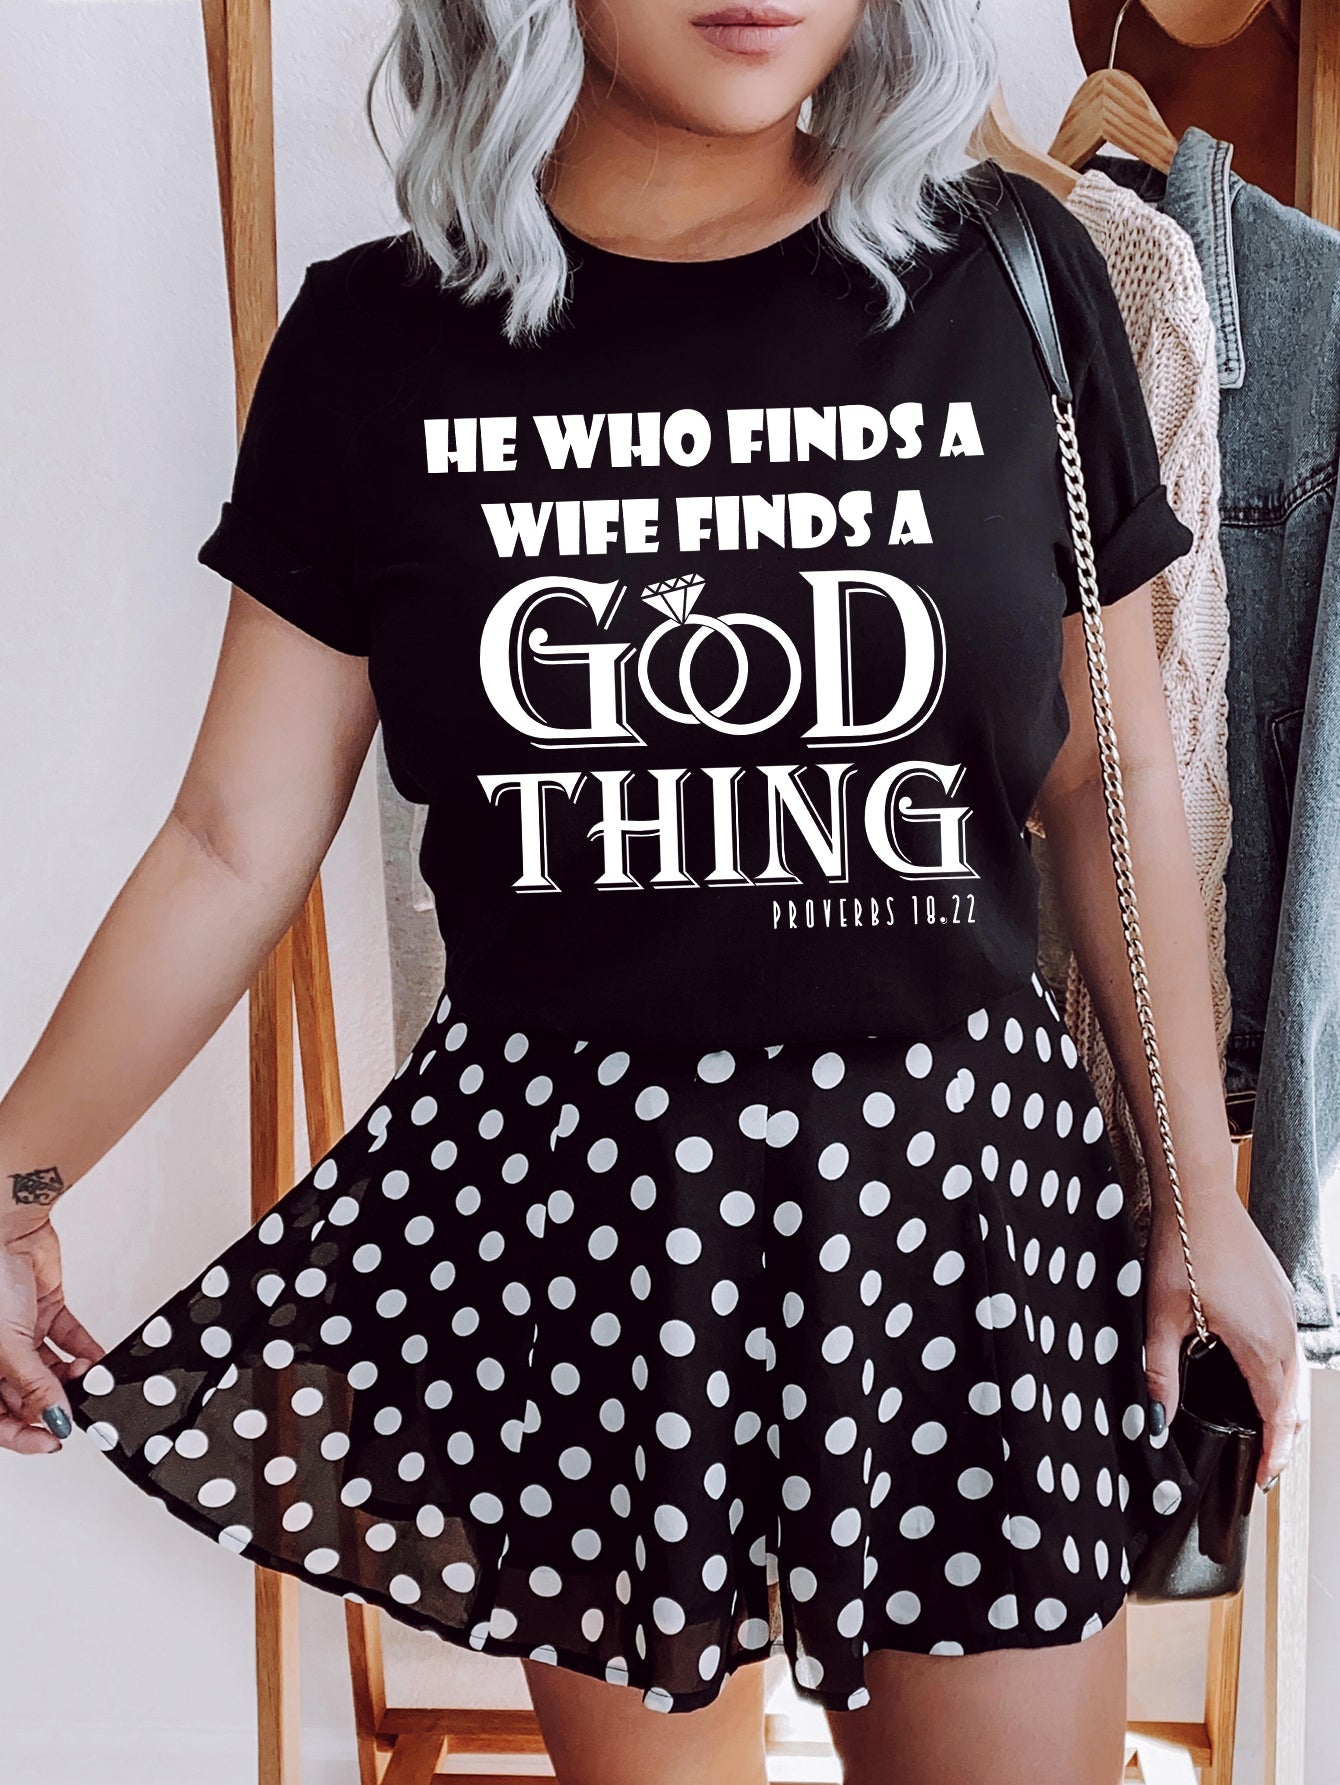 He Who Finds A Wife Finds A Good Thing Plus Size Women's Christian T-shirt claimedbygoddesigns